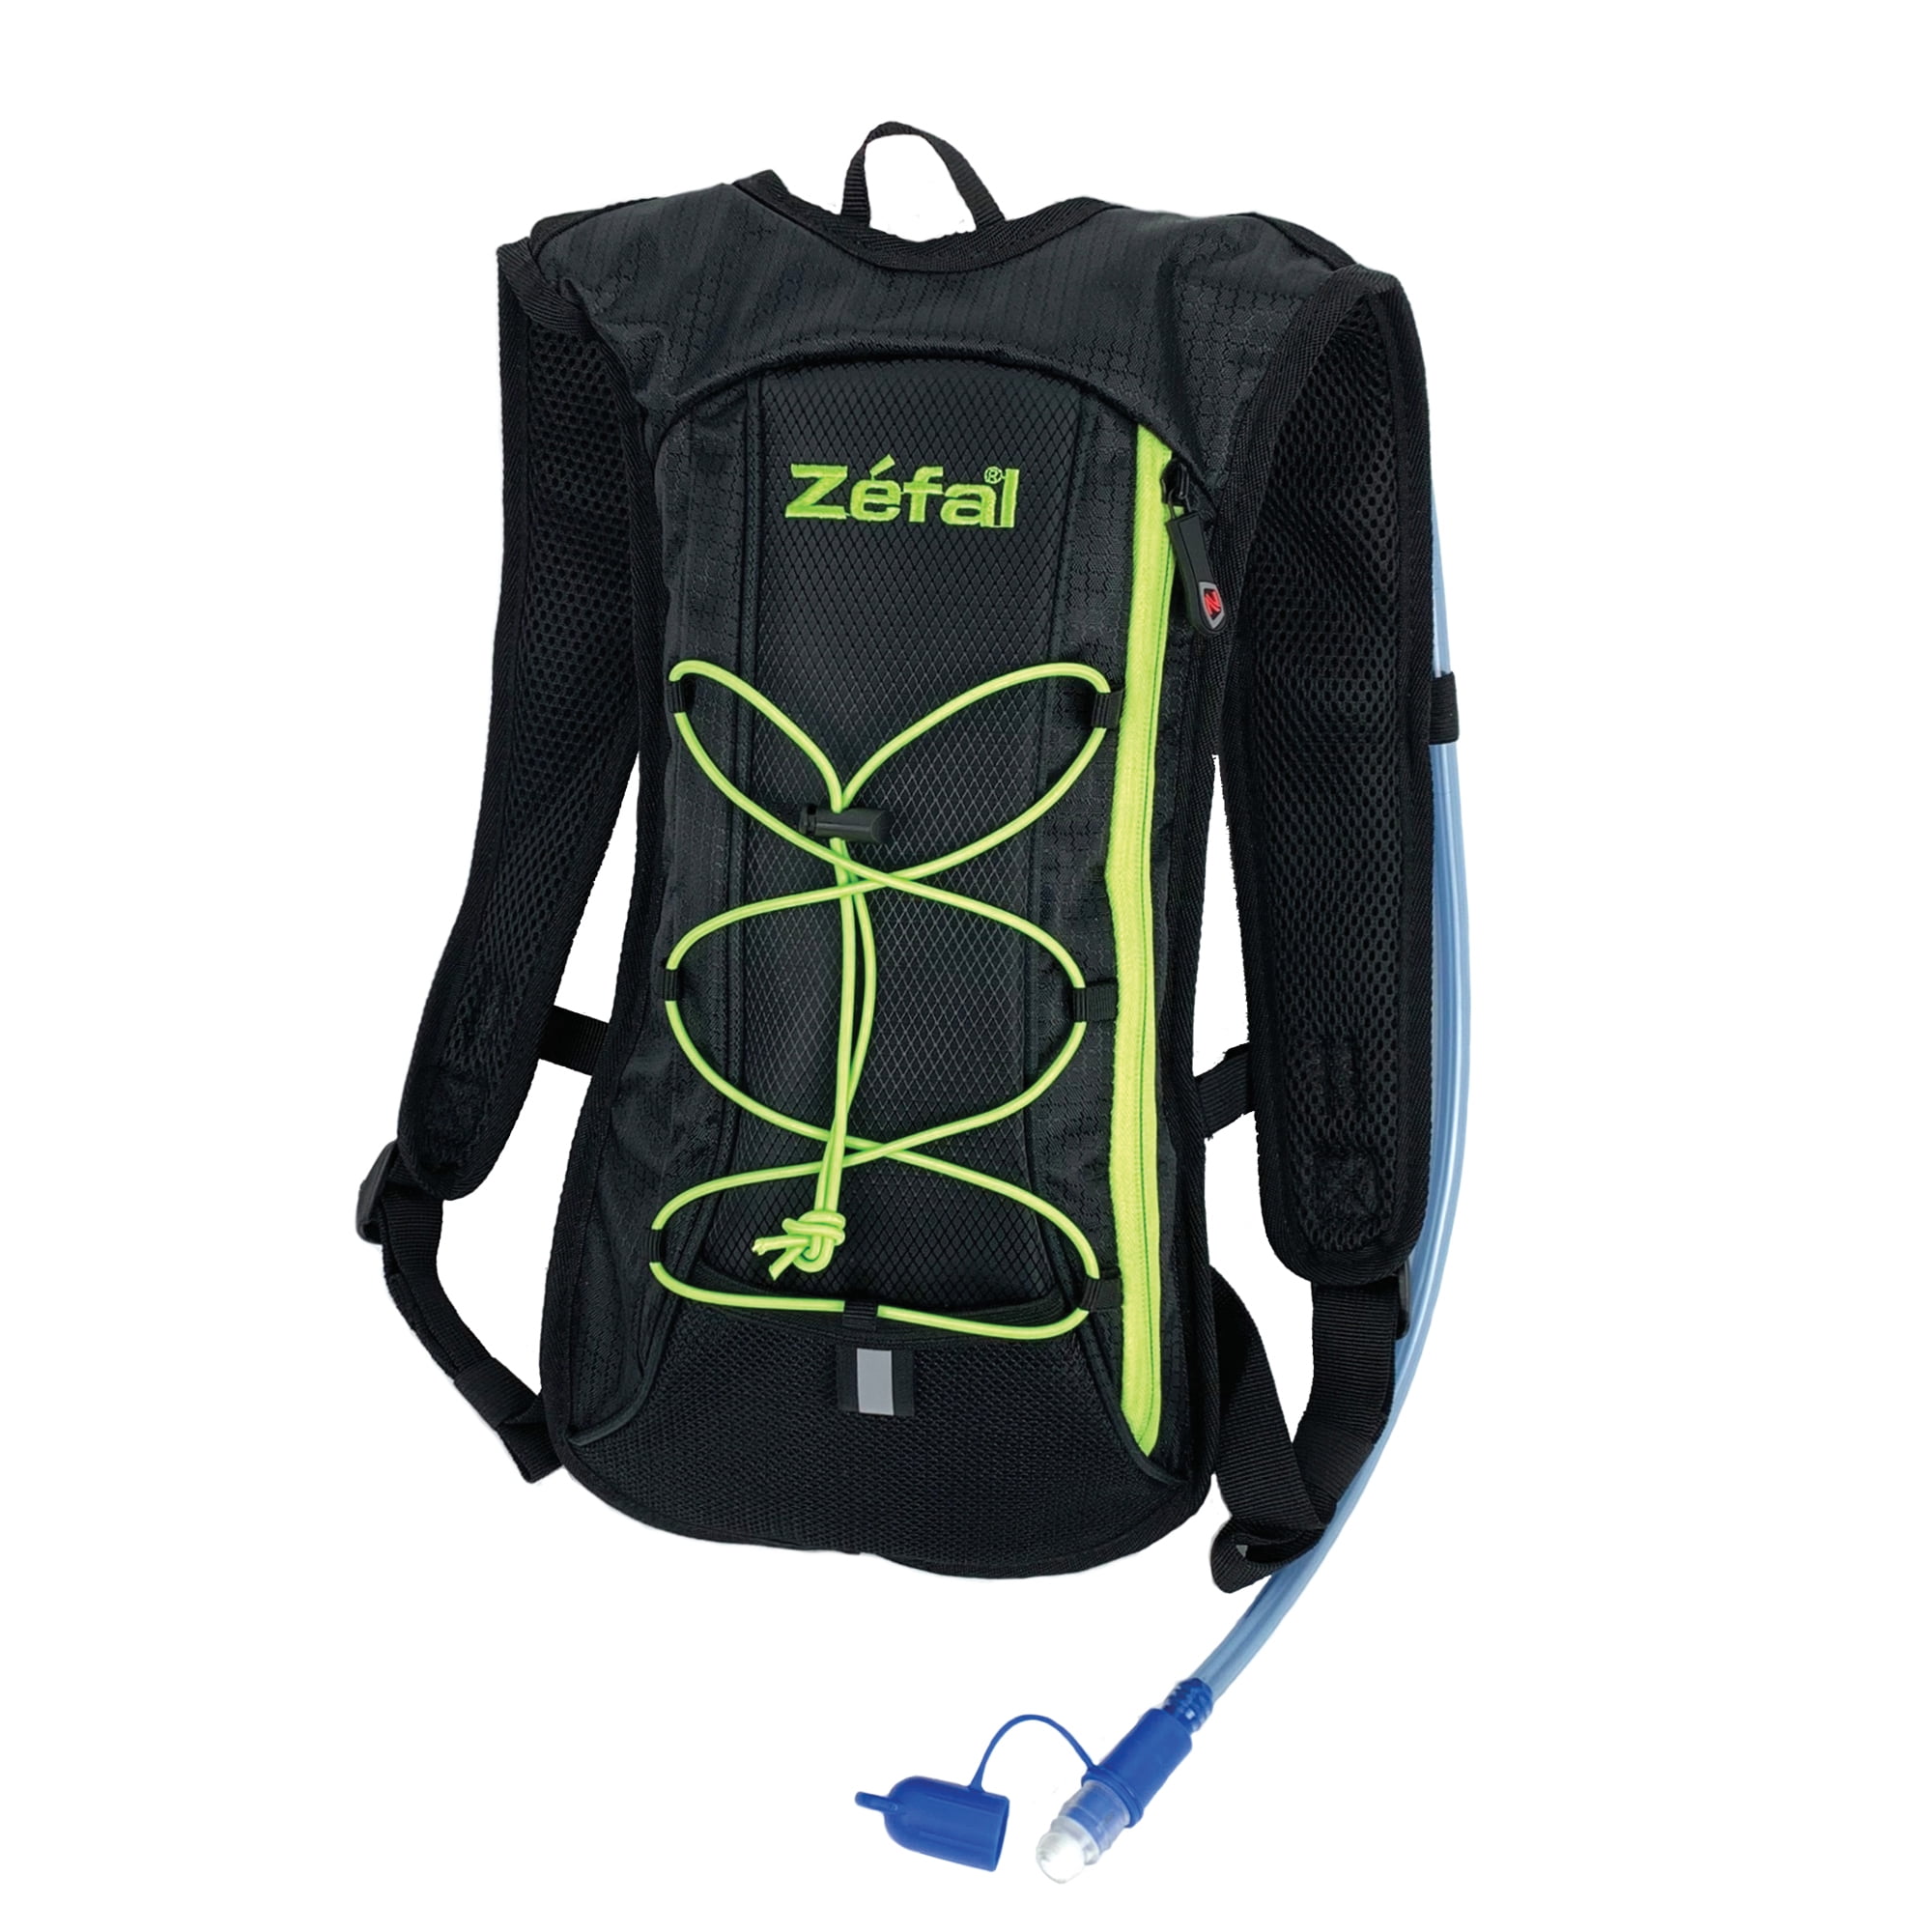 Zefal Outdoors 1.5 Liters Hydration Bag